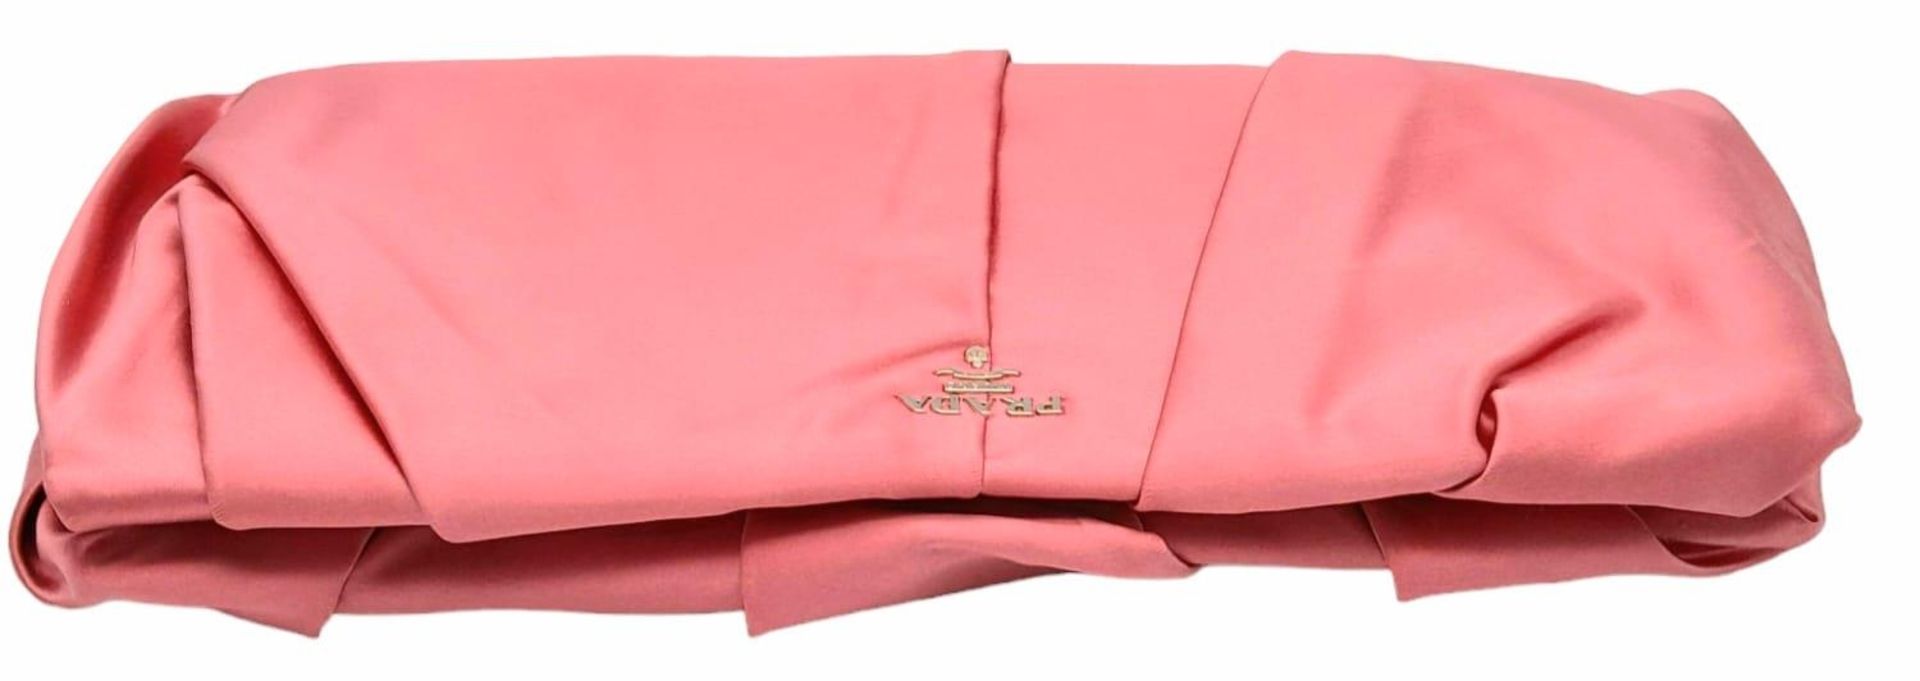 A Prada Pink Pleated Clutch Bag. Satin exterior with silver-toned hardware and press lock closure to - Image 3 of 9